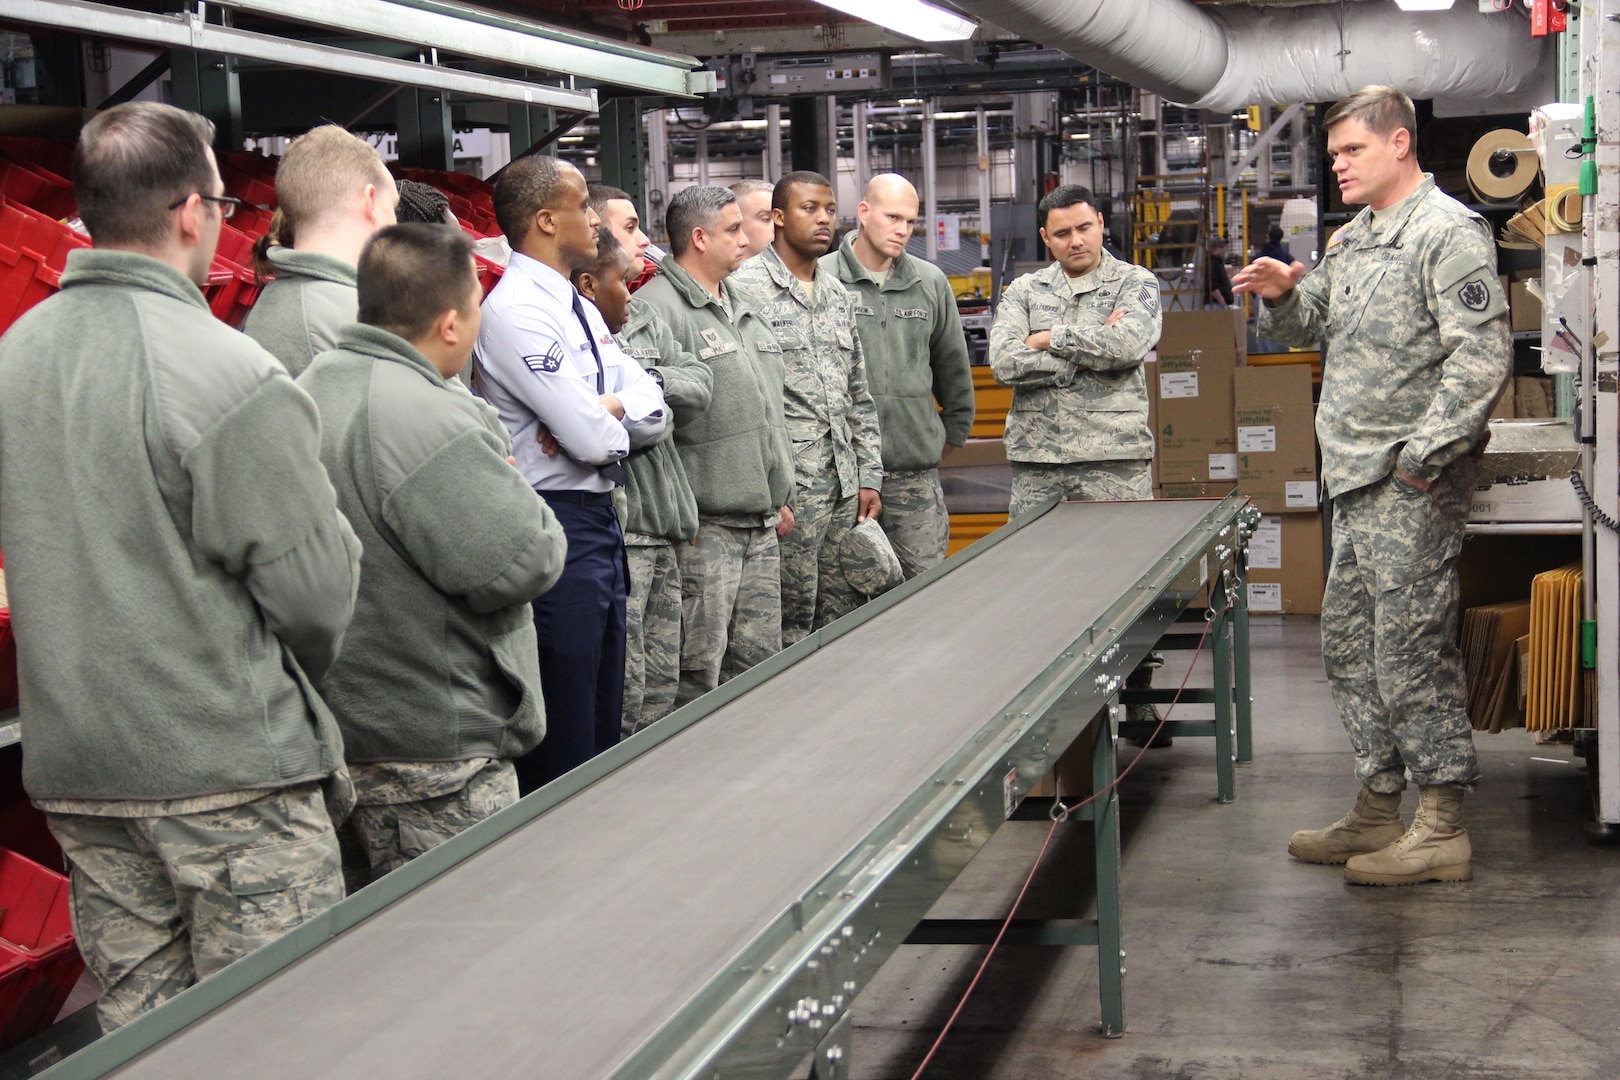 Members of the 87th Logistics Readiness Support Group from MaGuire Air Force Base, N.J., tour the Eastern Distribution Center, the Department of Defense’s largest warehouse, during their Dec. 3 visit to DLA Distribution Headquarters.